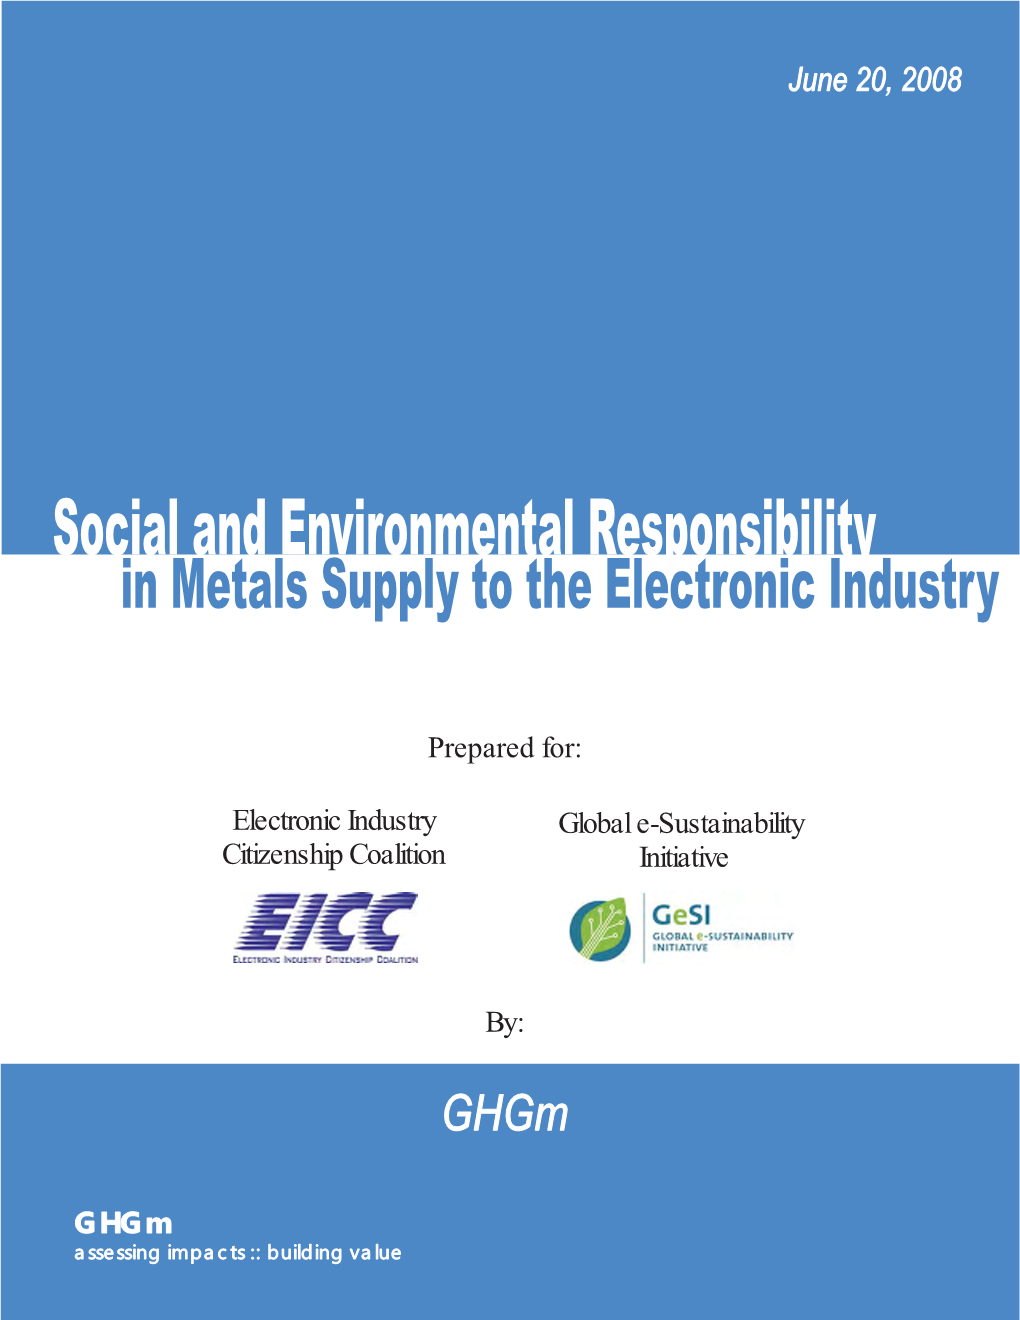 Social and Environmental Responsibility in Metals Supply to the Electronic Industry